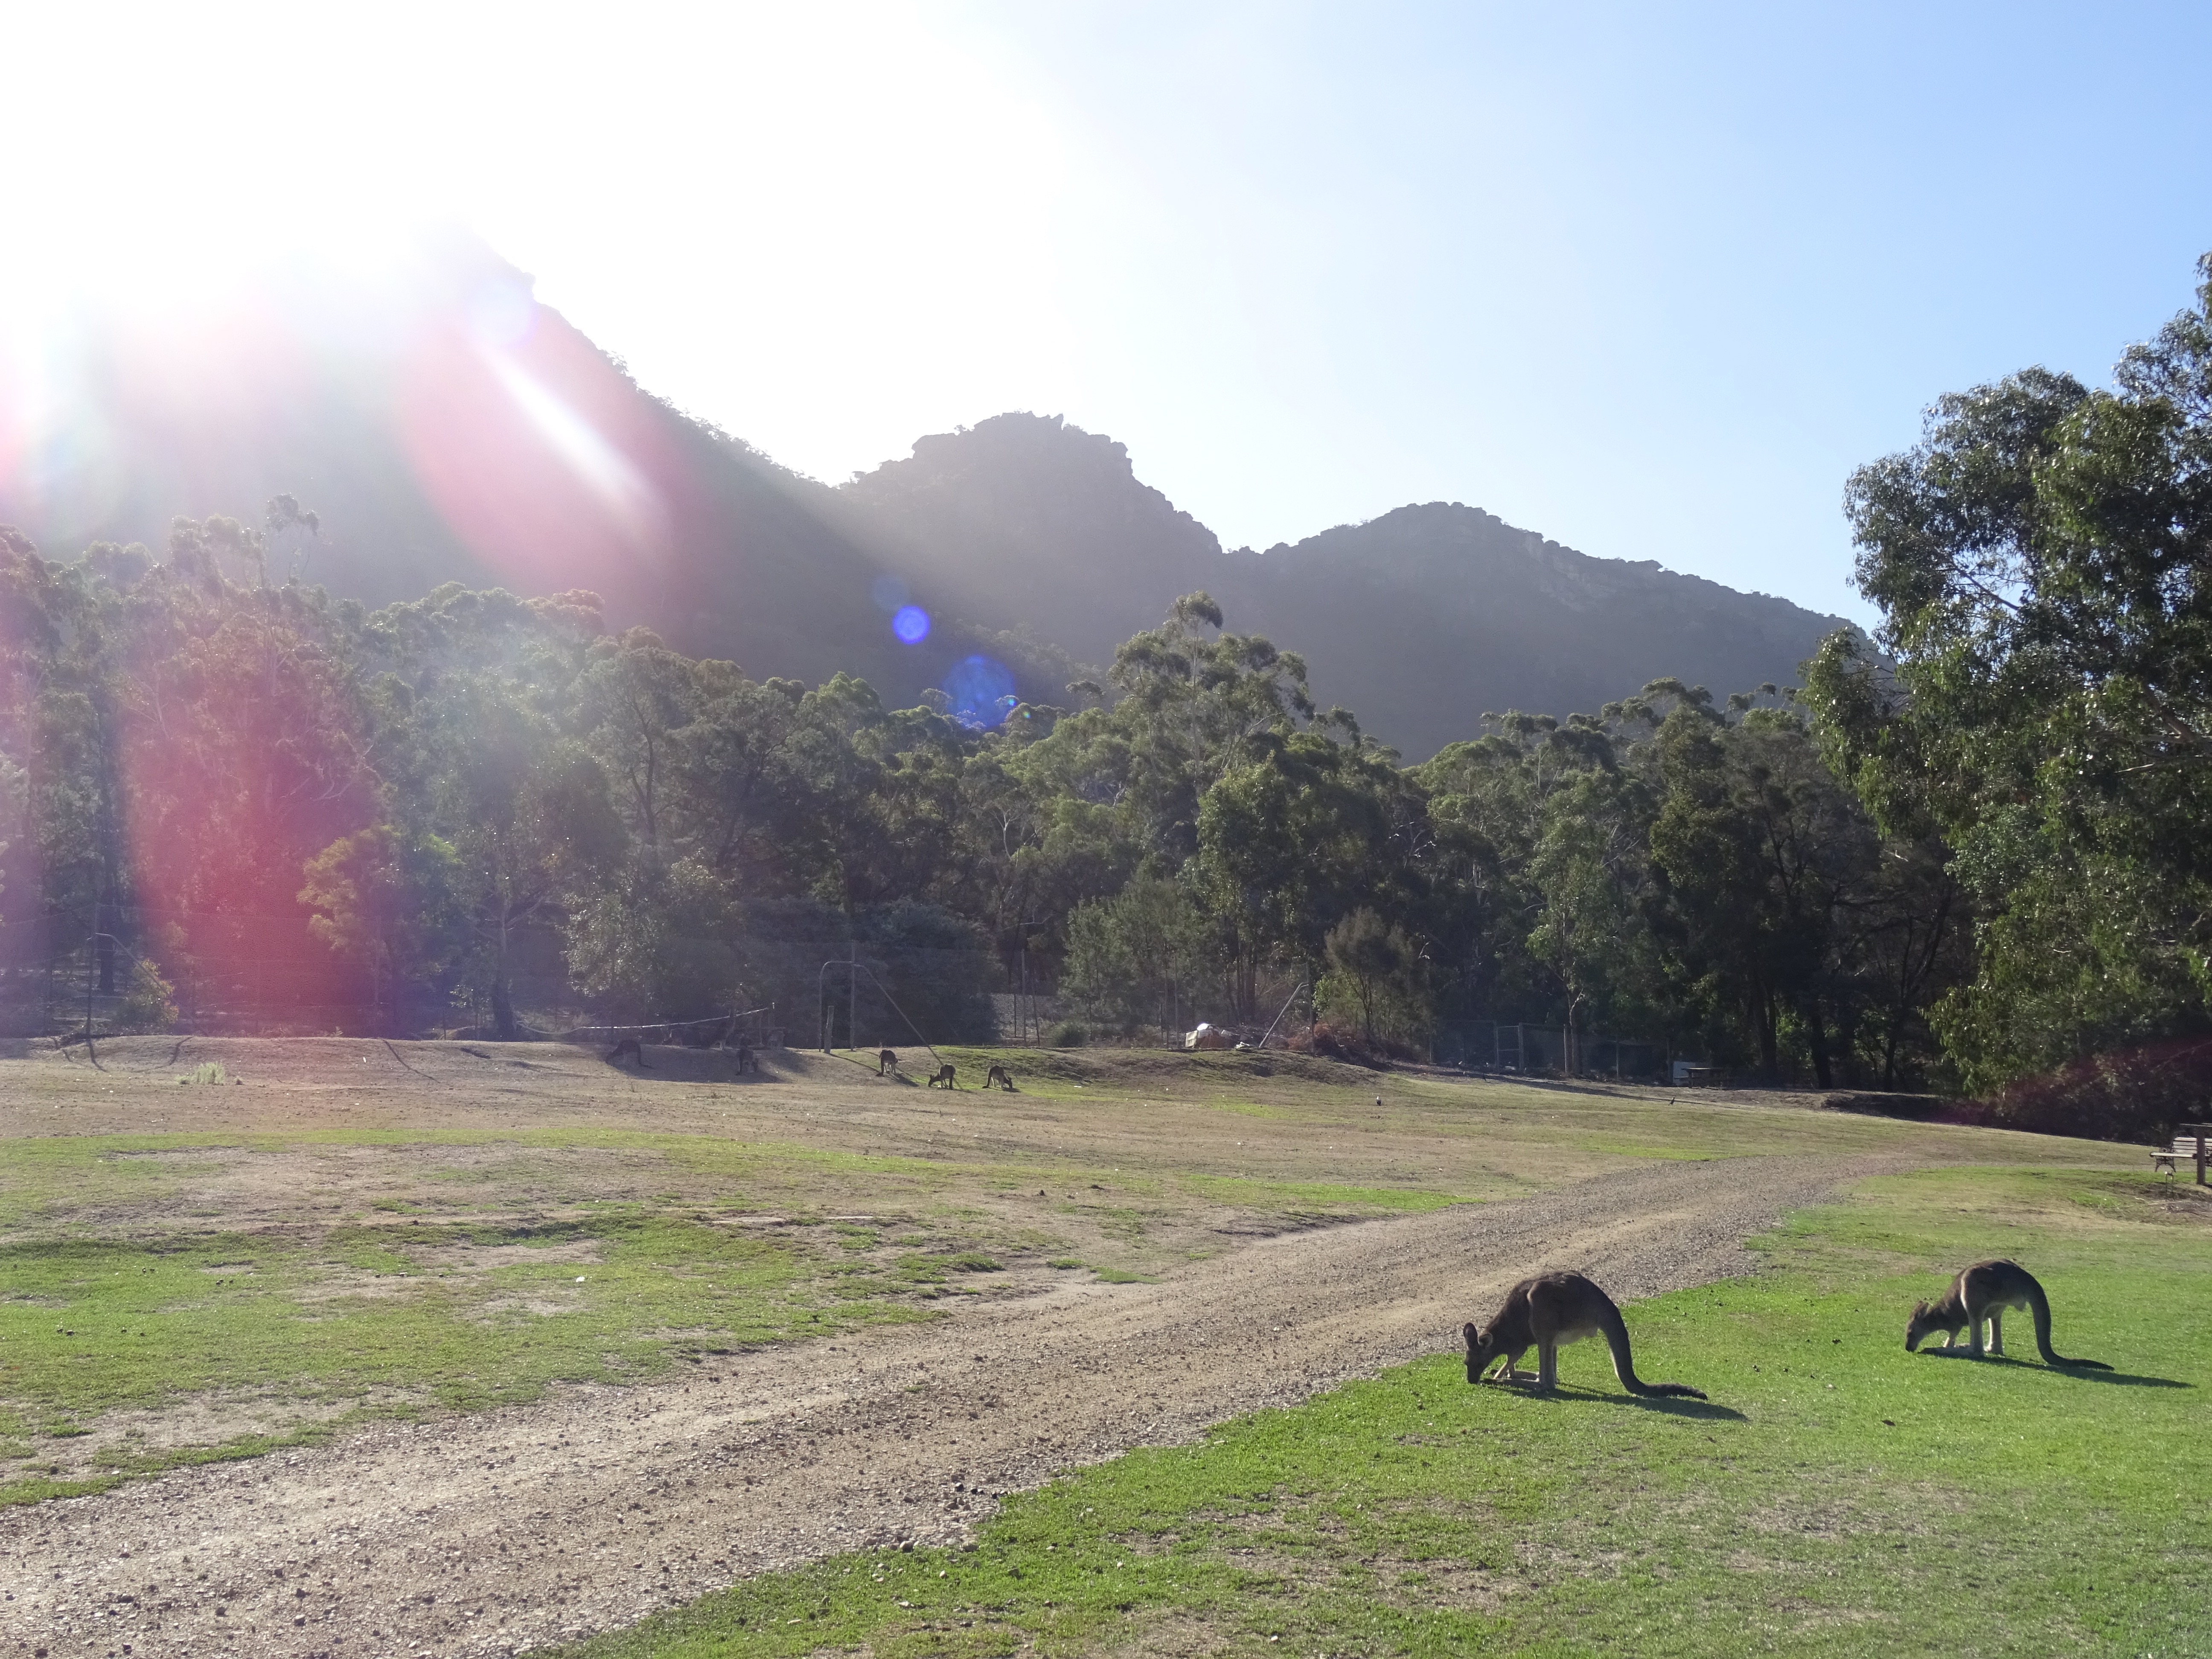 Kangaroos and Mountains. I love this country